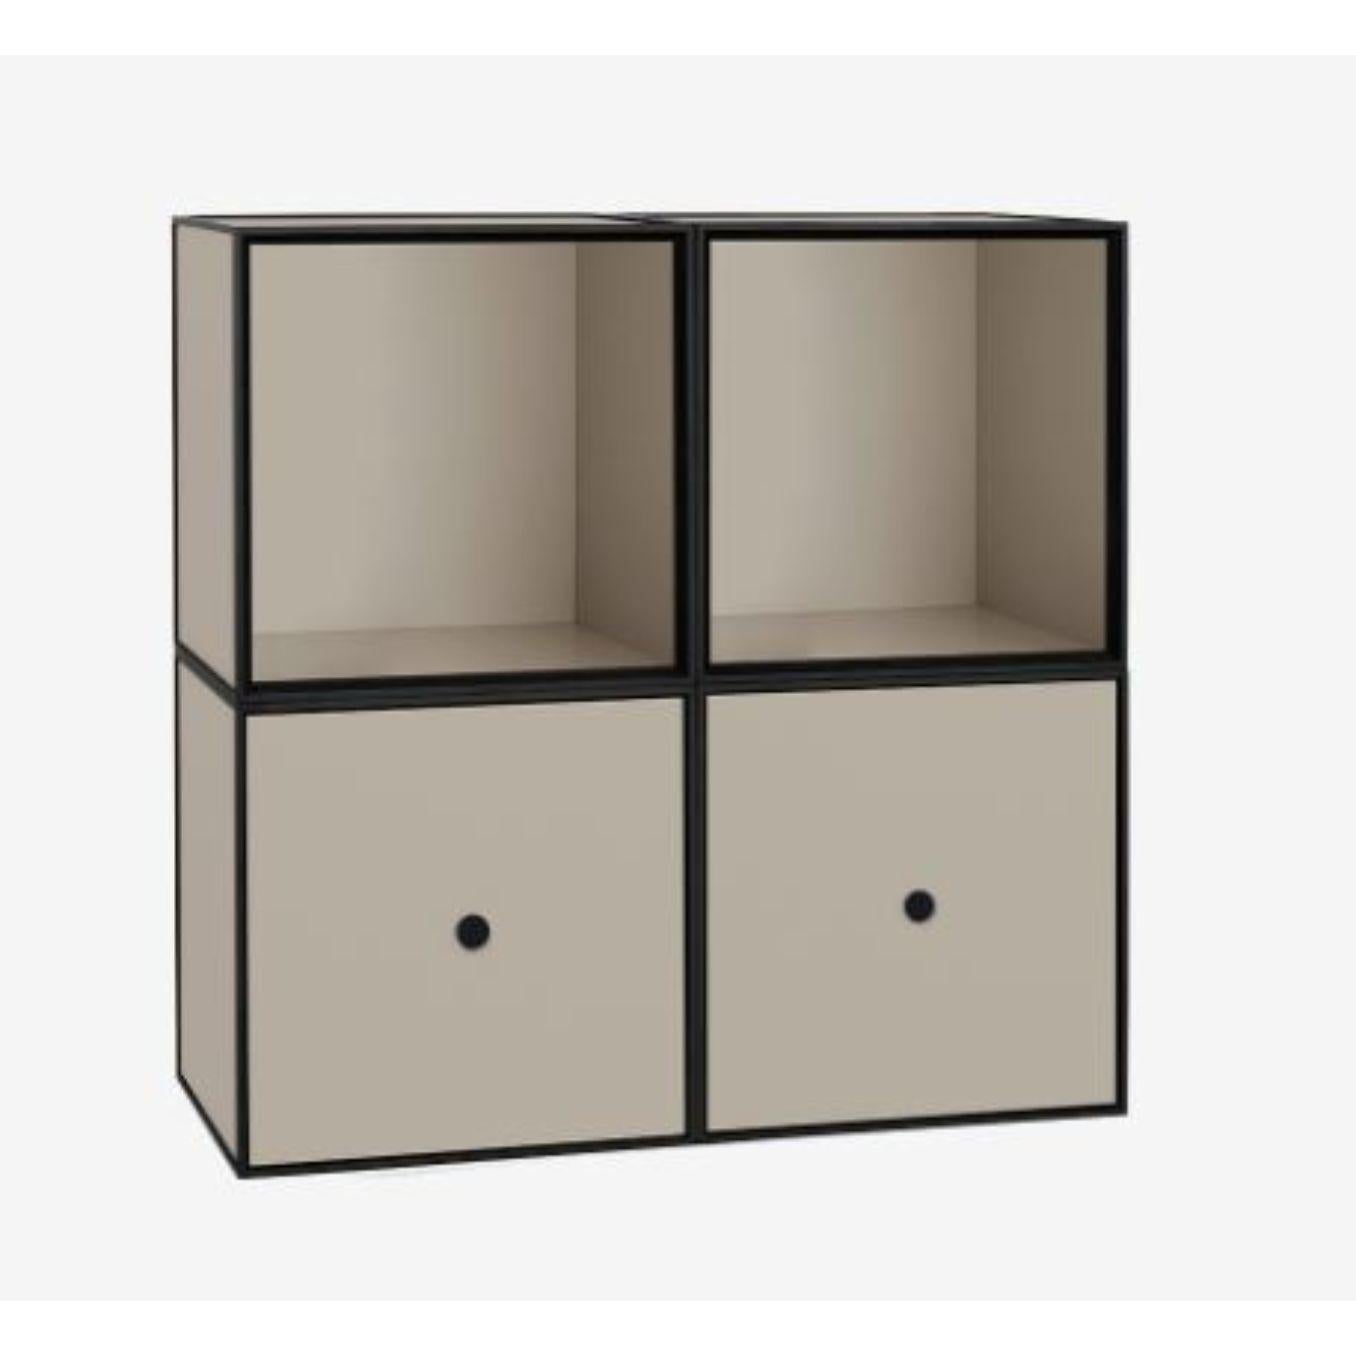 35 sand frame square standard box by Lassen.
Dimensions: D 70 x W 35 x H 70 cm. 
Materials: Finér, Melamin, Melamine, Metal, Veneer.
Also available in different colours and dimensions.
Weight: 23.74 Kg

By Lassen is a Danish design brand